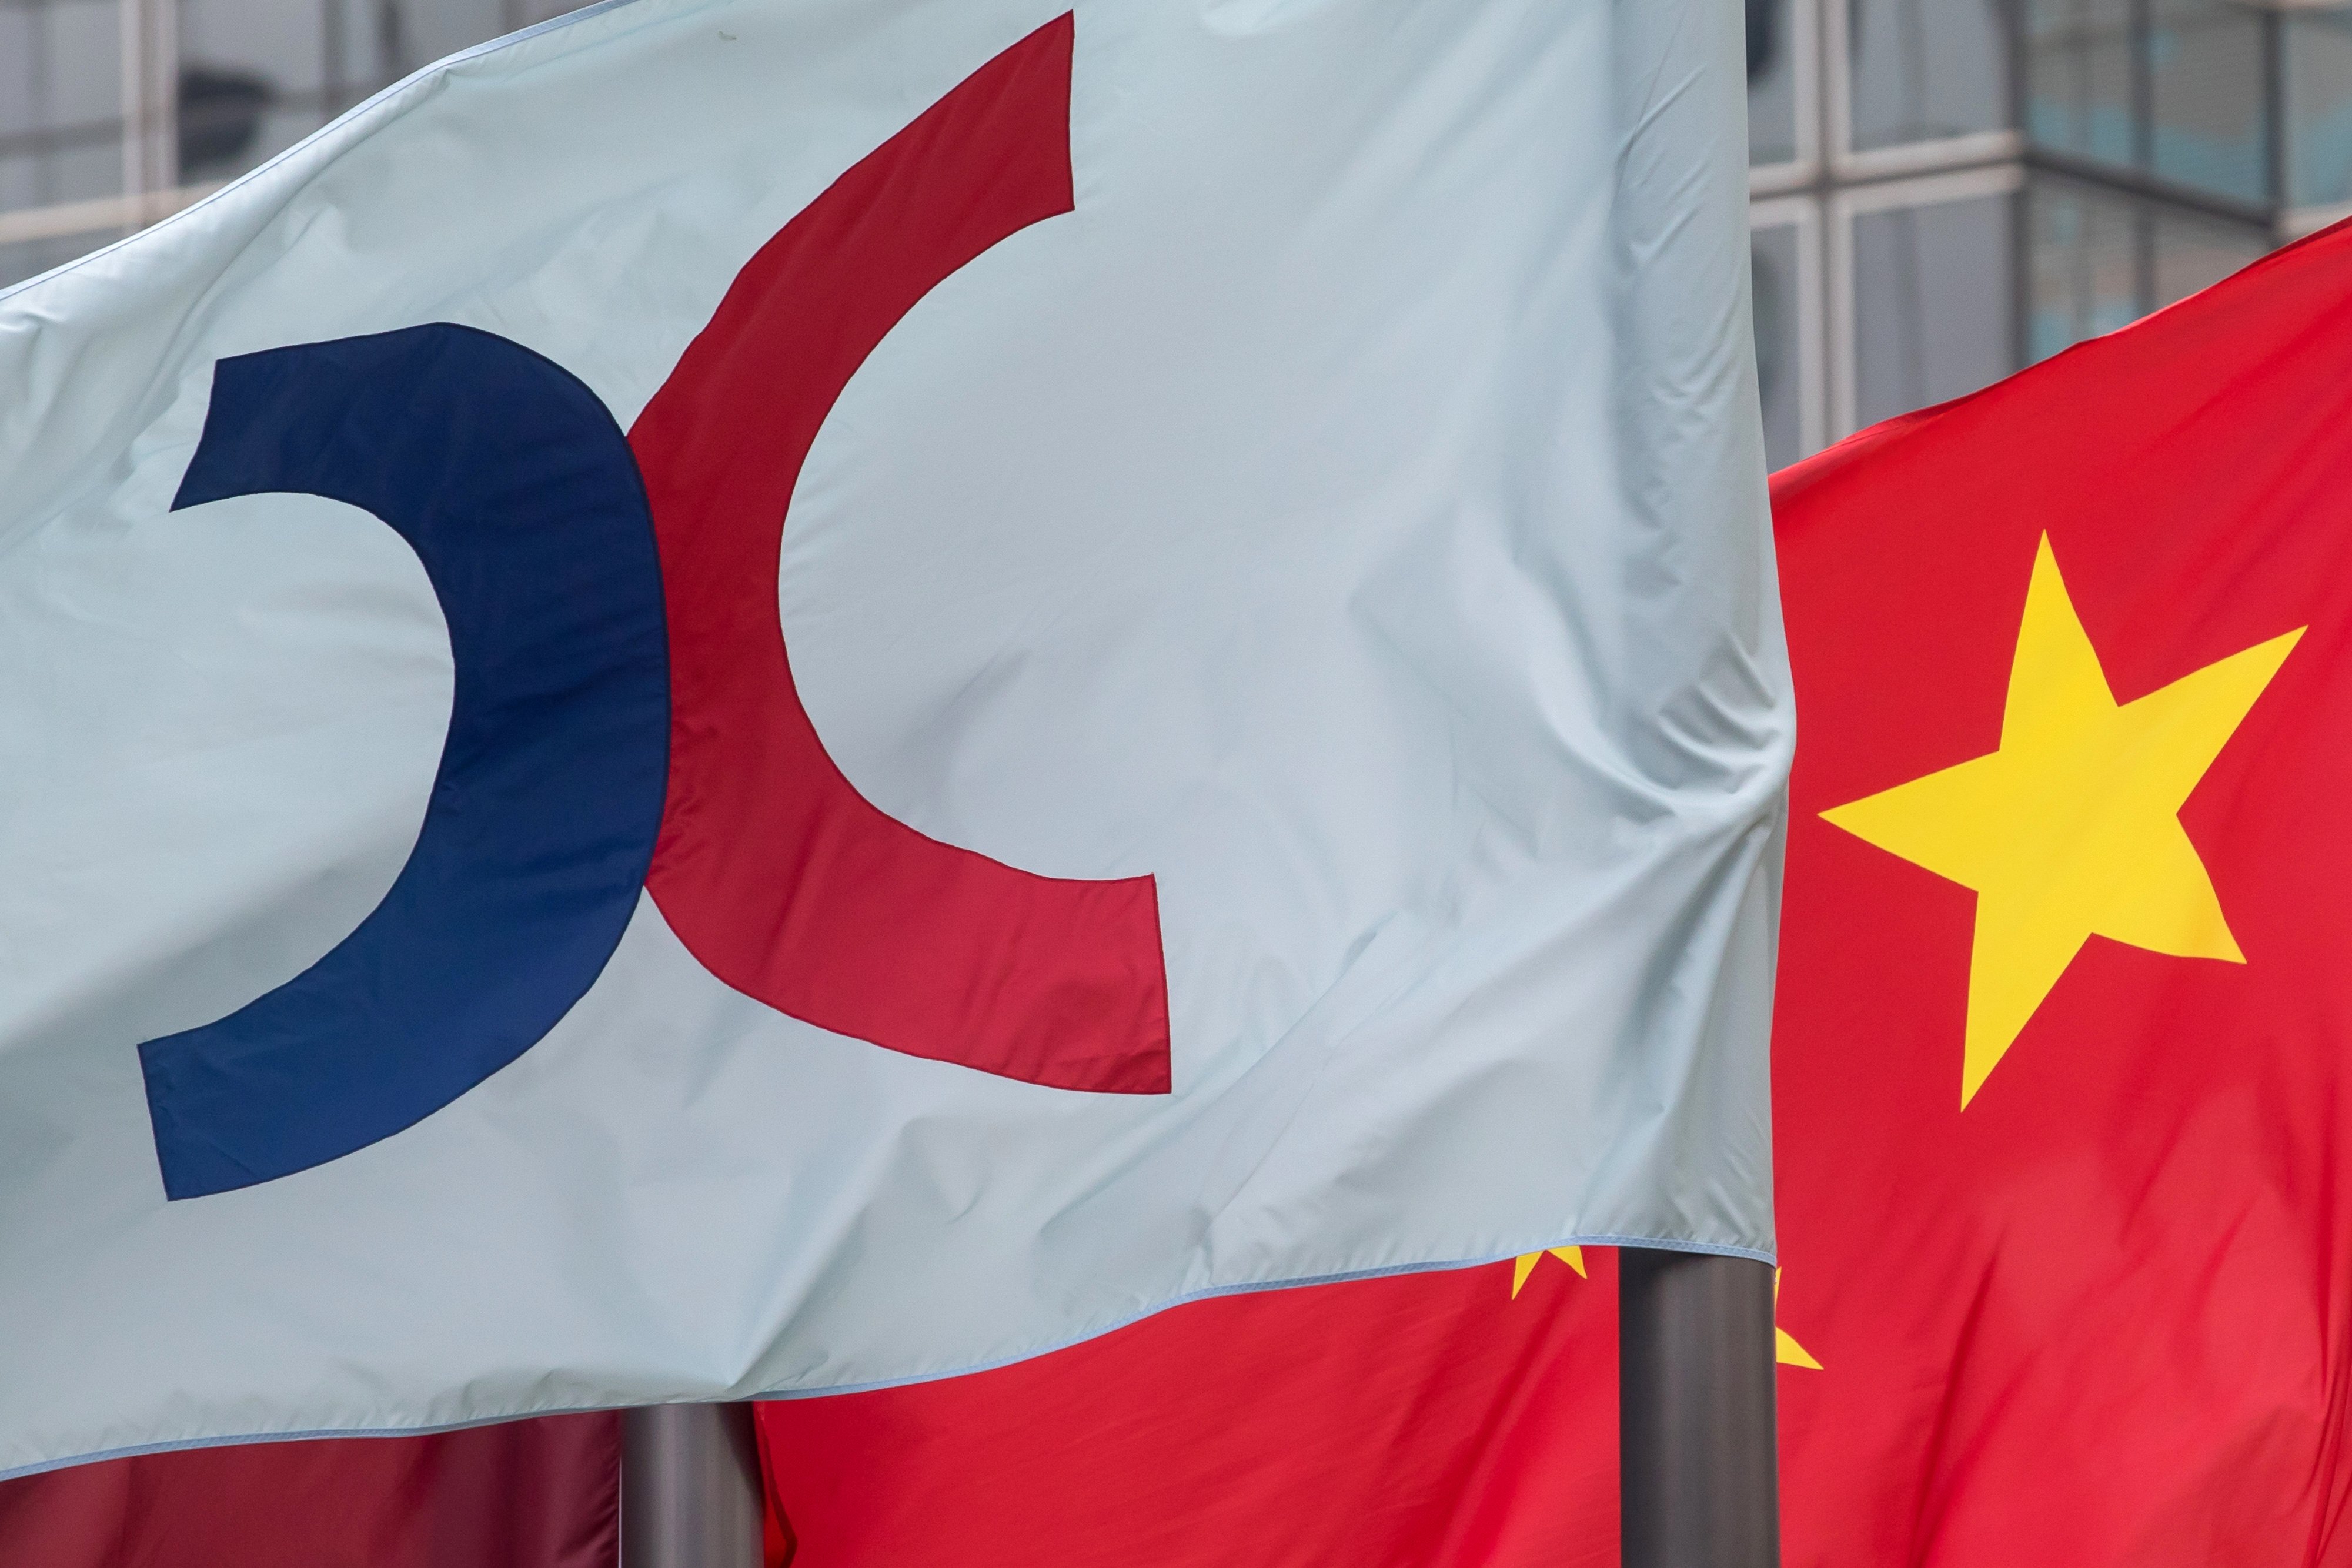 The Hong Kong stock exchange flag flies outside Exchange Square. Photo: Bloomberg